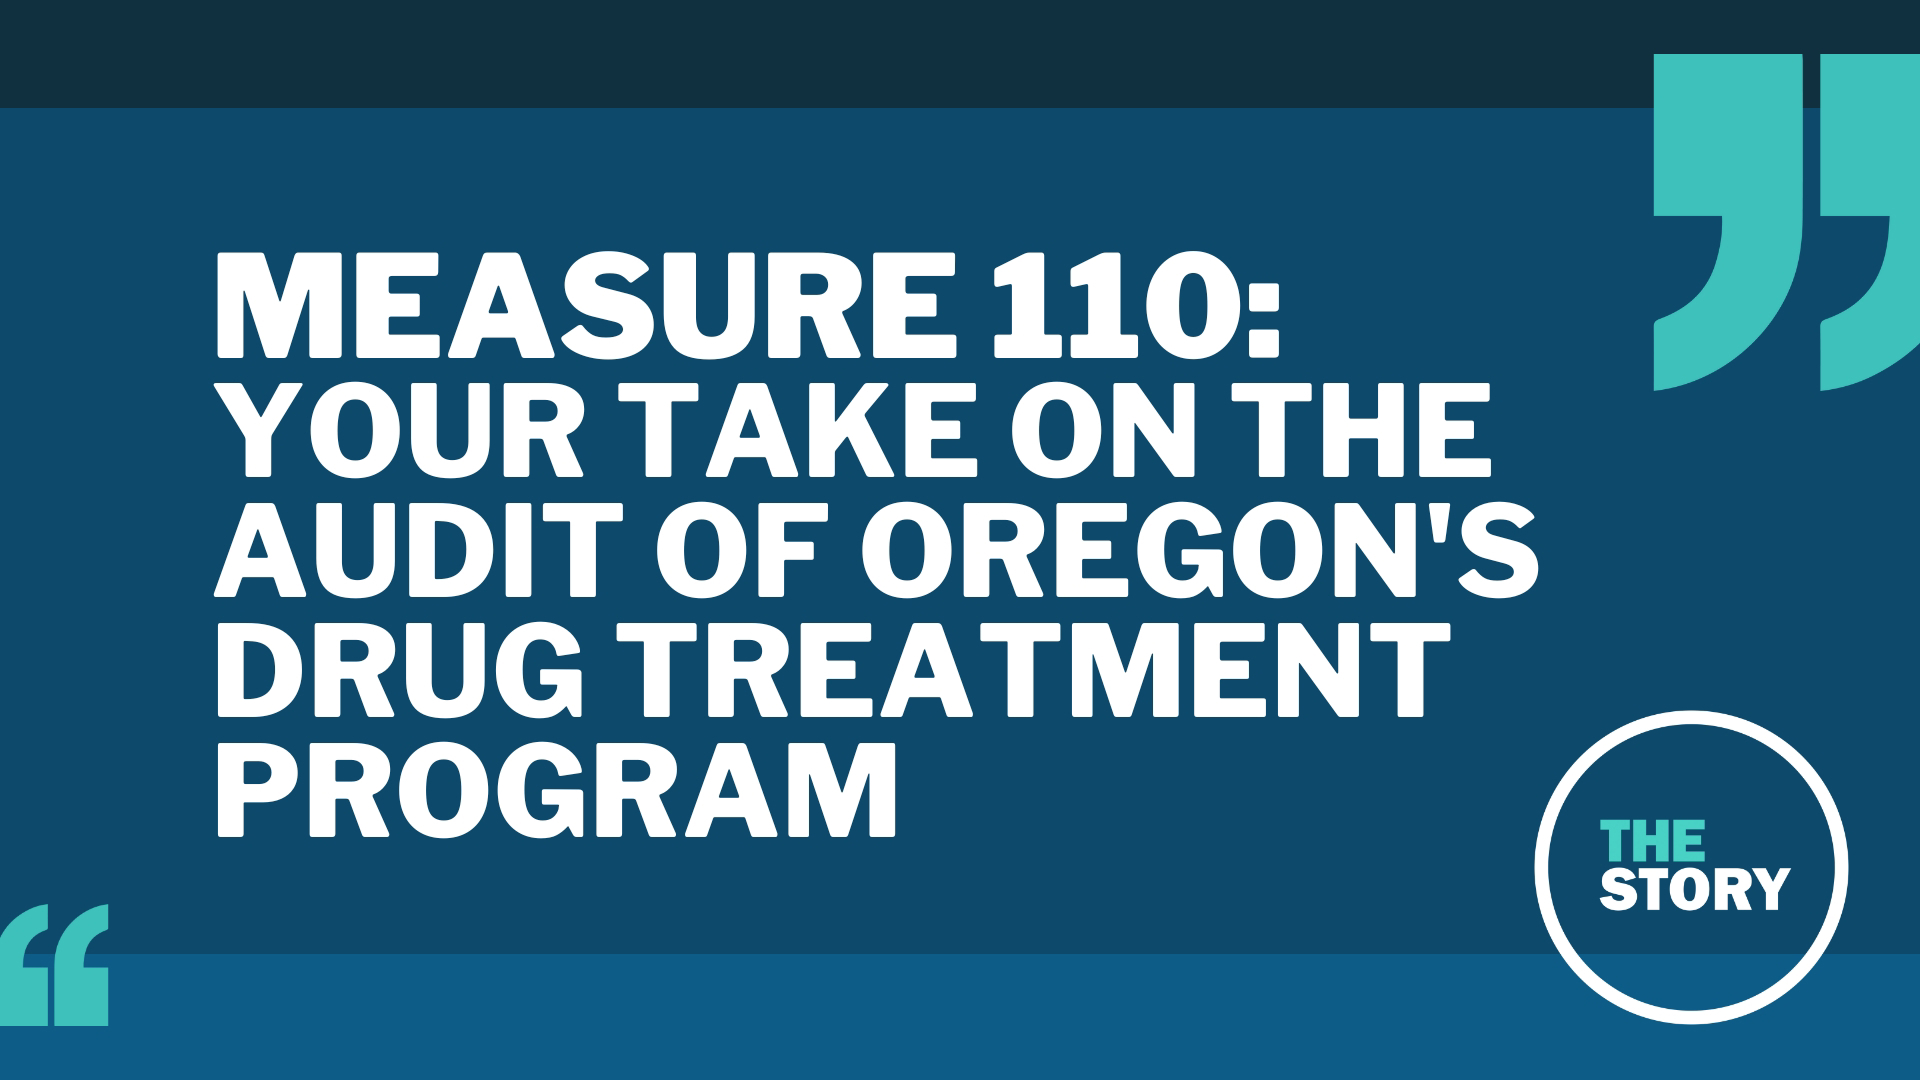 Thursday night, we covered the audit of Oregon’s drug treatment program under Measure 110. Here’s what you had to say about our reporting.